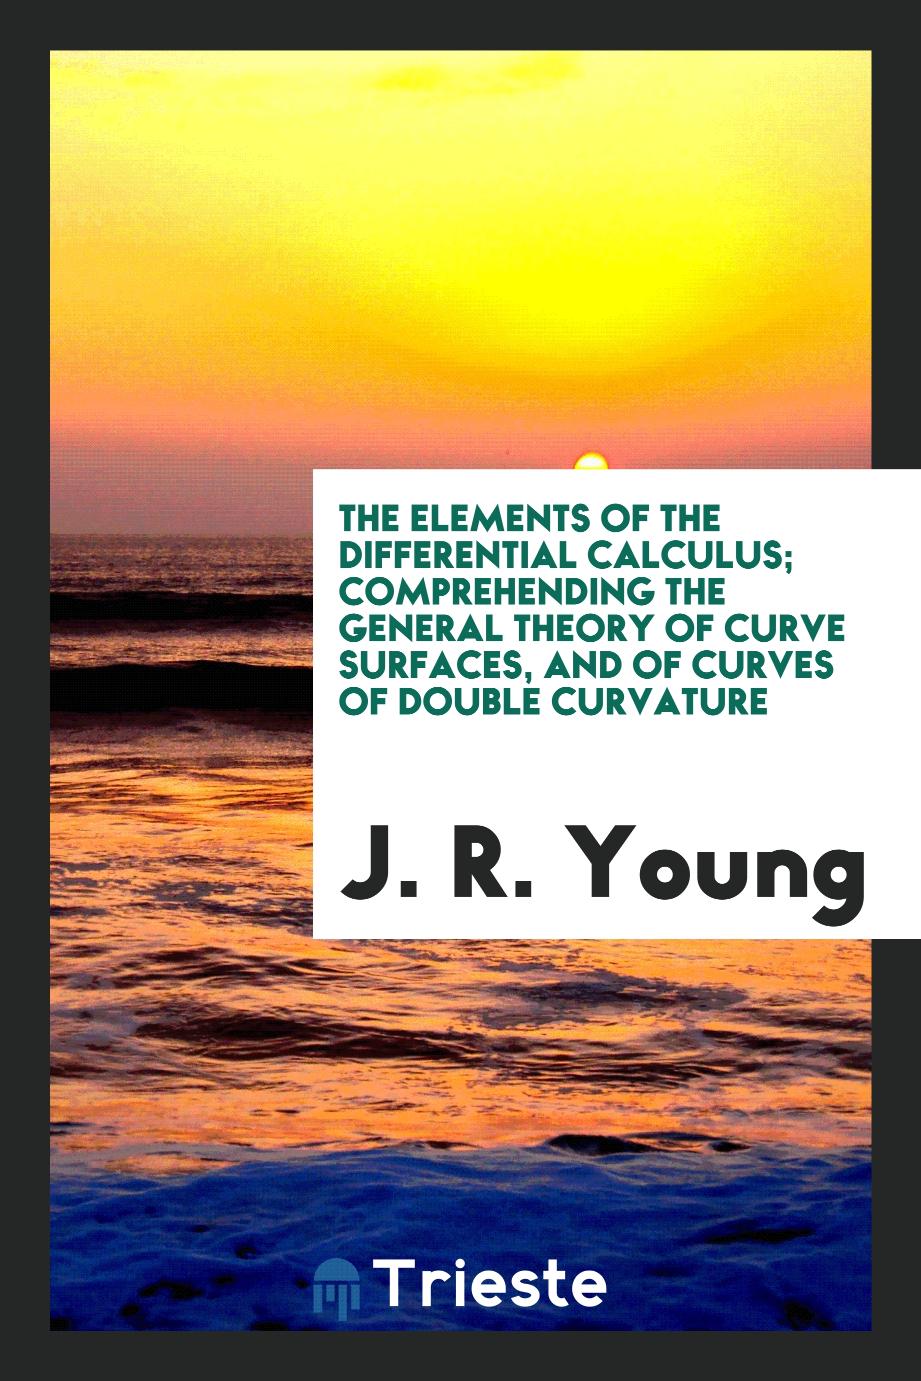 The elements of the differential calculus; comprehending the general theory of curve surfaces, and of curves of double curvature